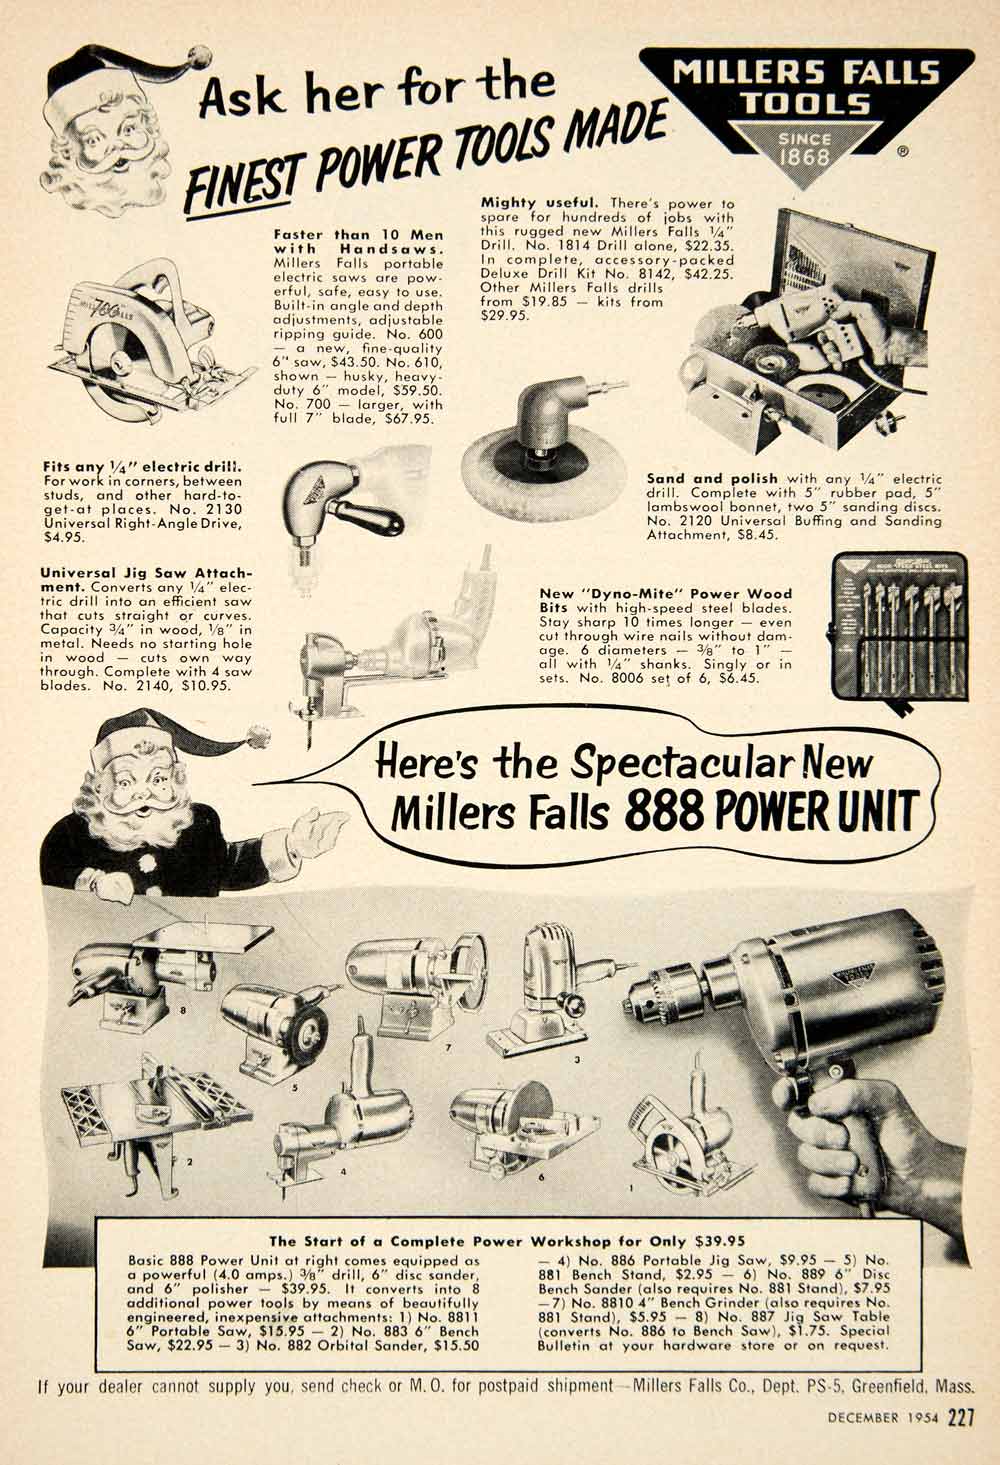 1954 Ad Miller Falls Tools 888 Power Unit Drill Disc Sander Polisher Bench PSC3